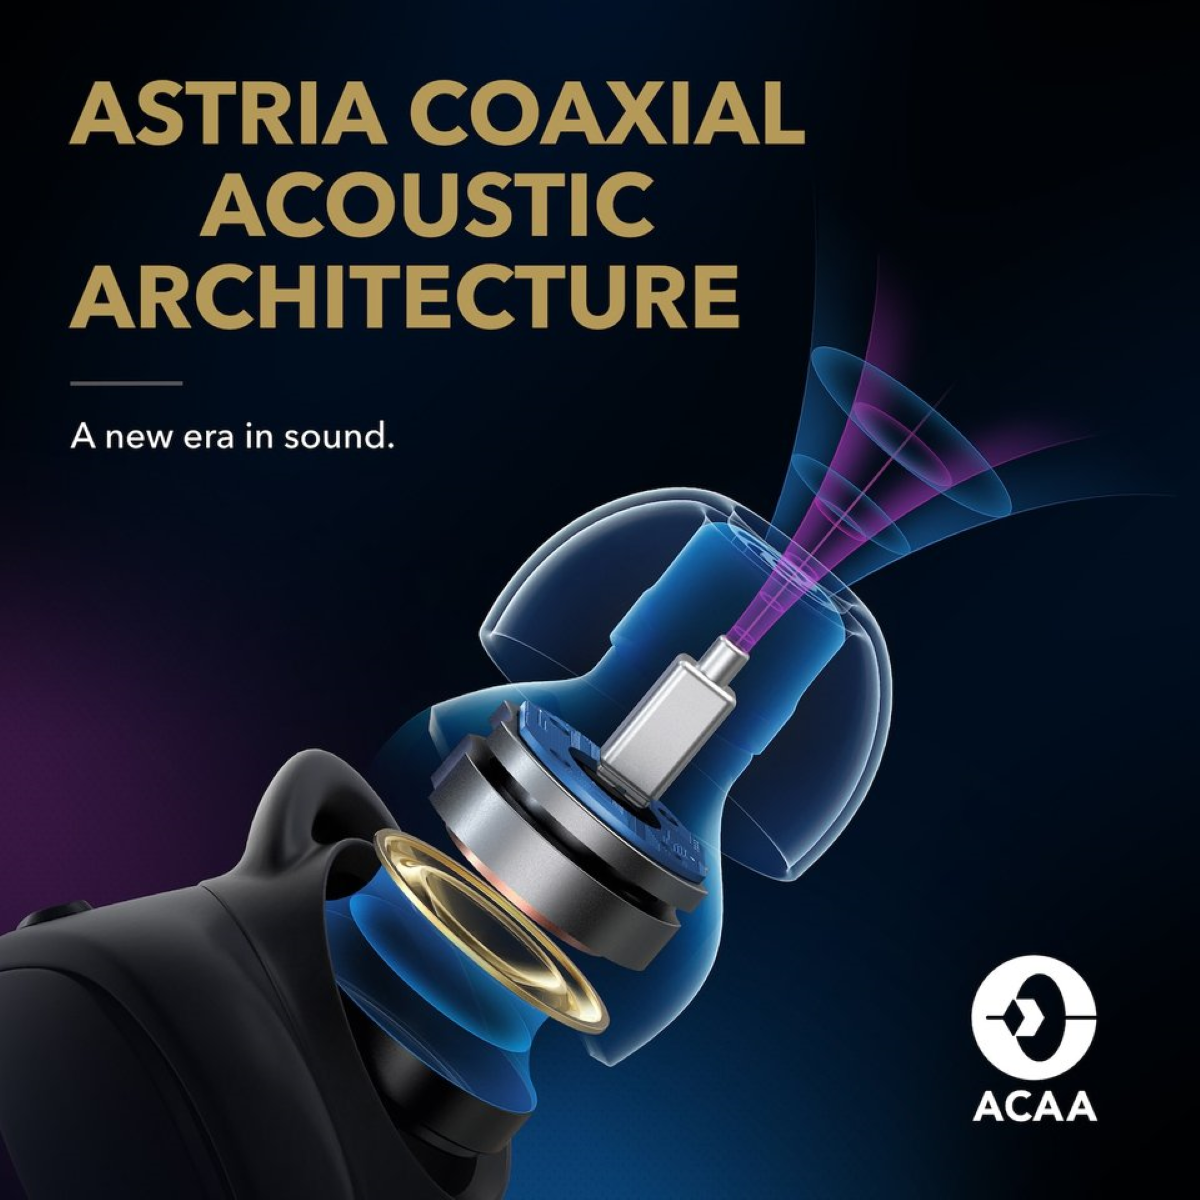 Astria Coaxial Acoustic Architecture